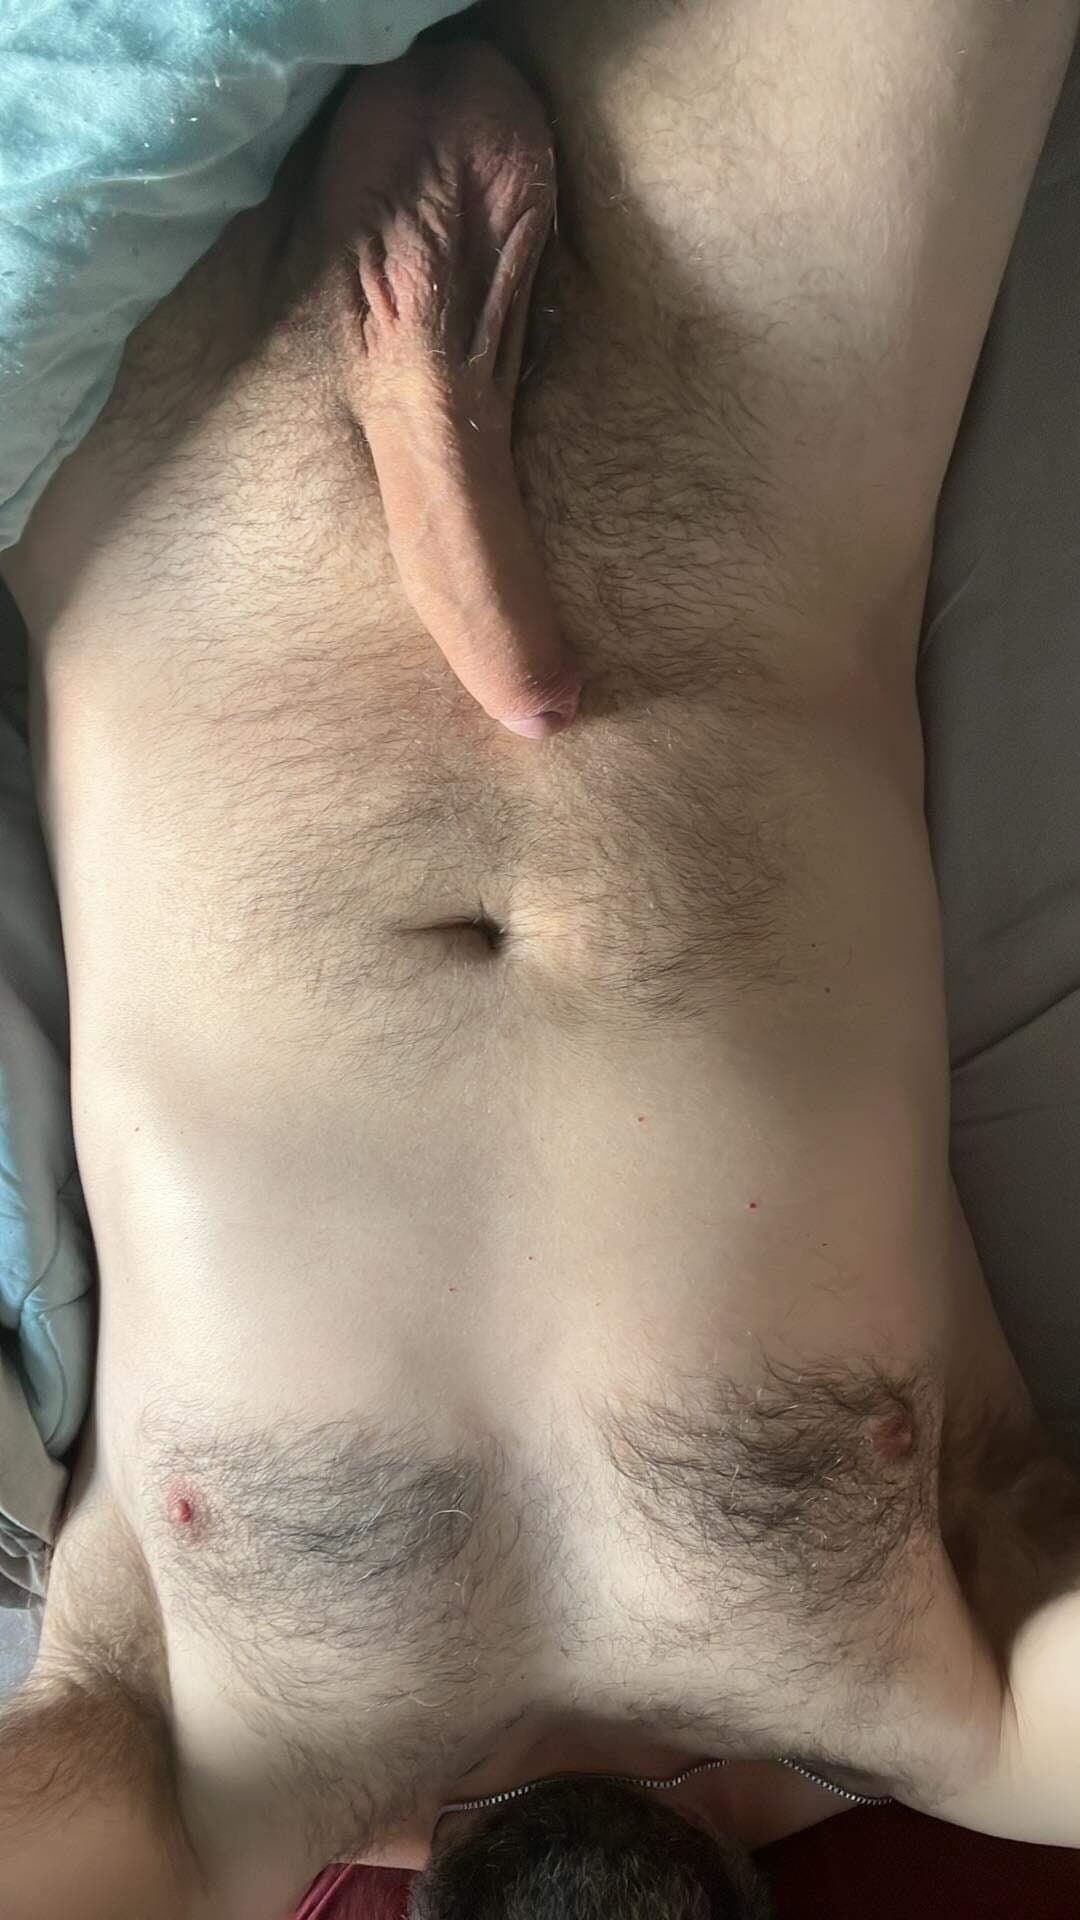 Me jerking off and my hairy ass #10